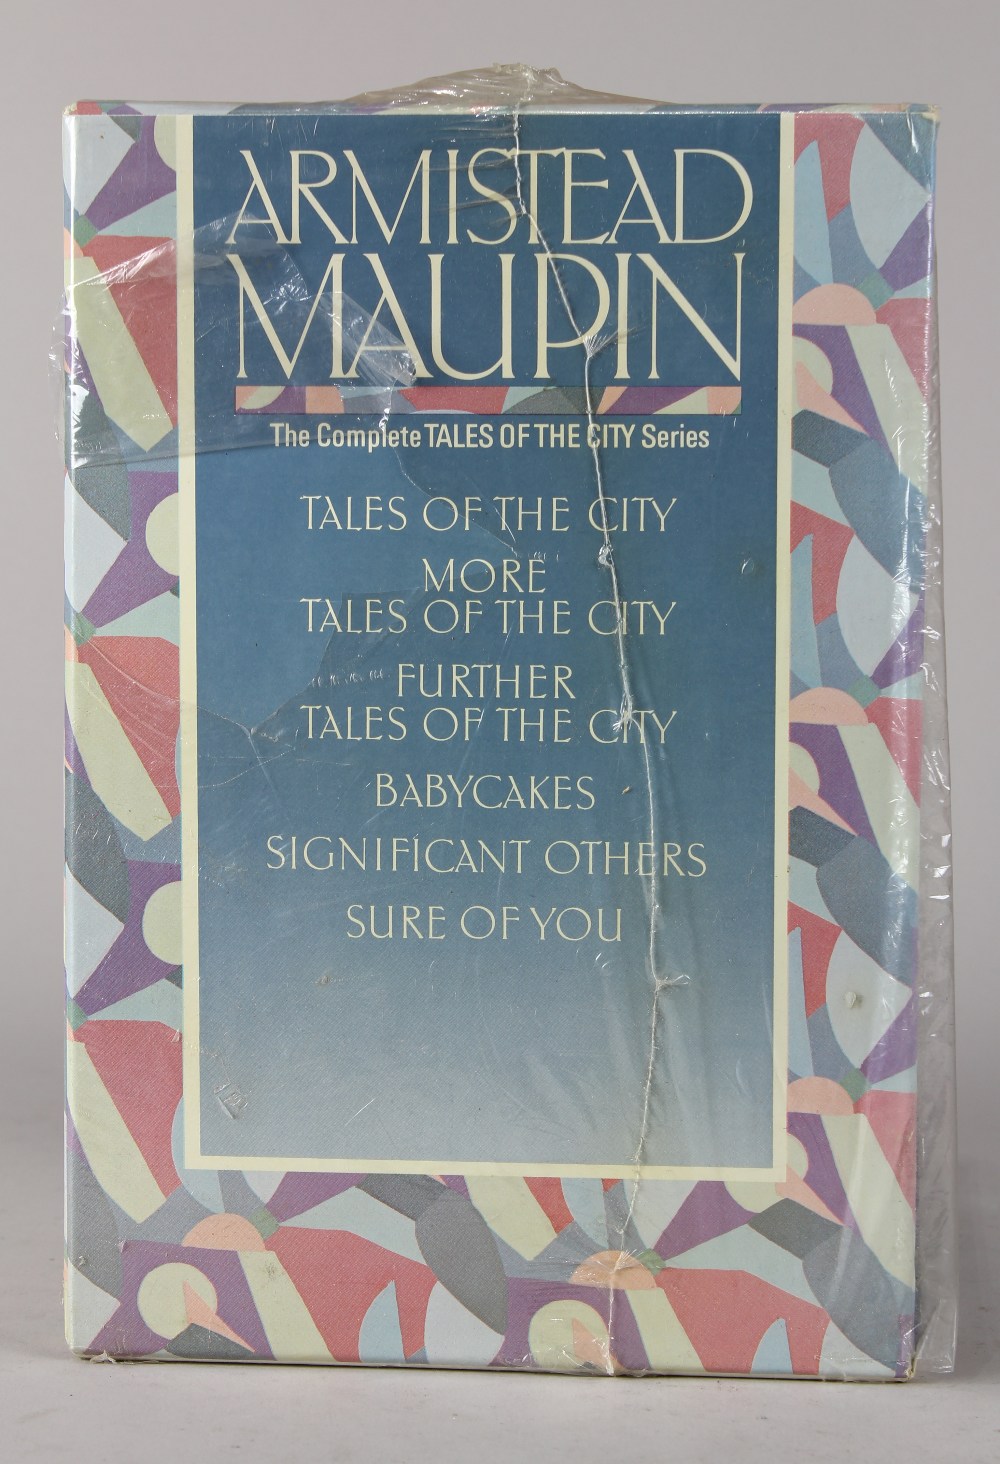 (lot of 6) Armstead Maupin, "Tales of the City," series, limited and signed addition of 150, The - Image 2 of 3